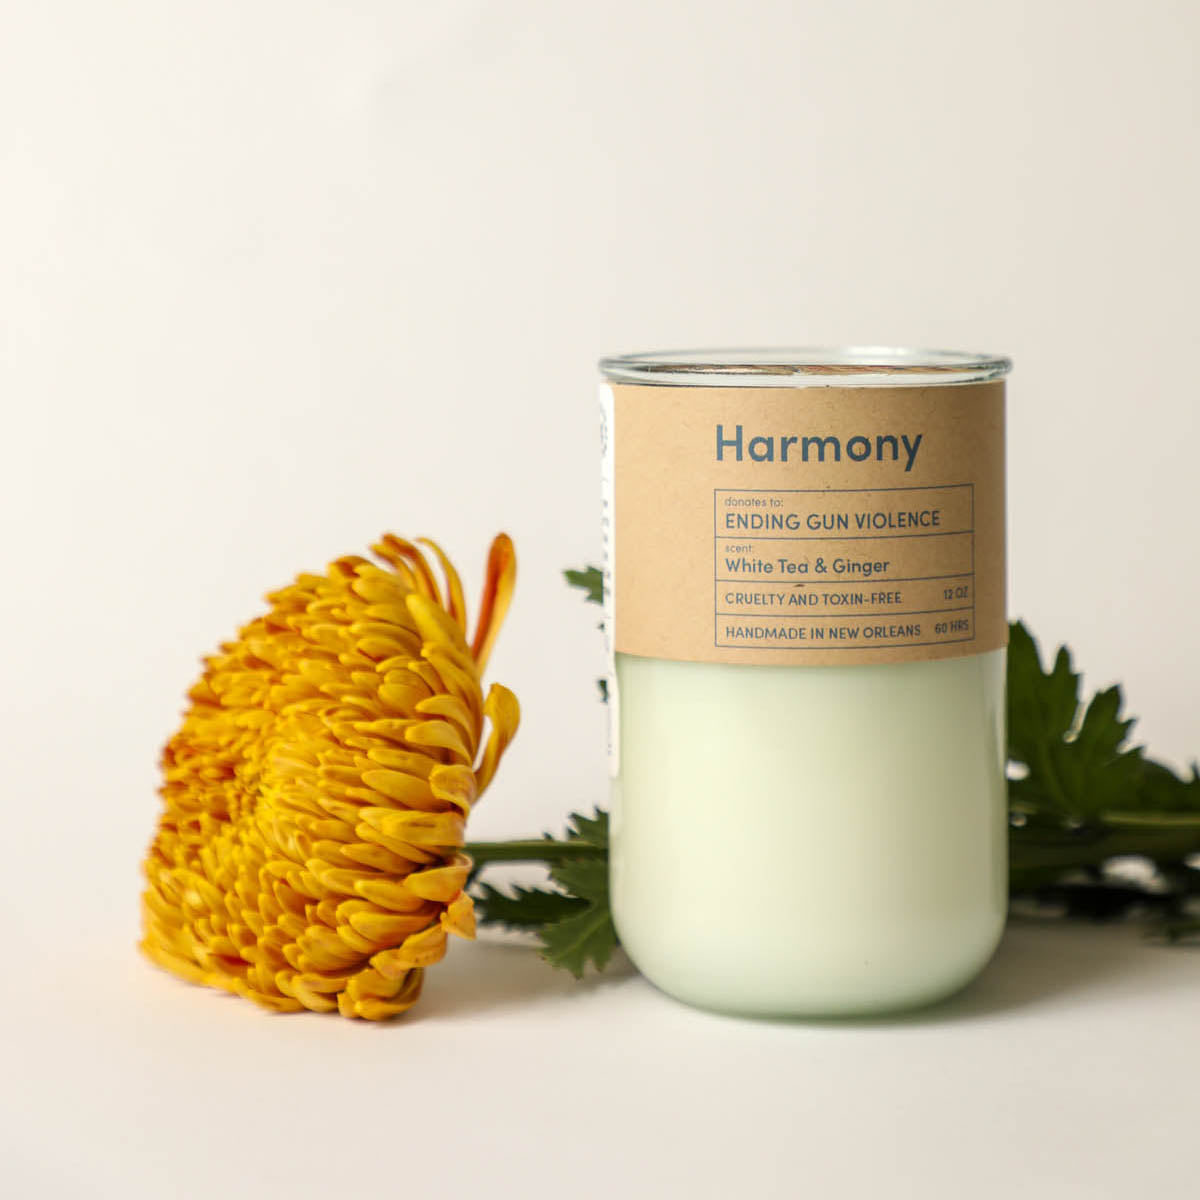 Harmony / Tea & Ginger Scent: Candles for Good